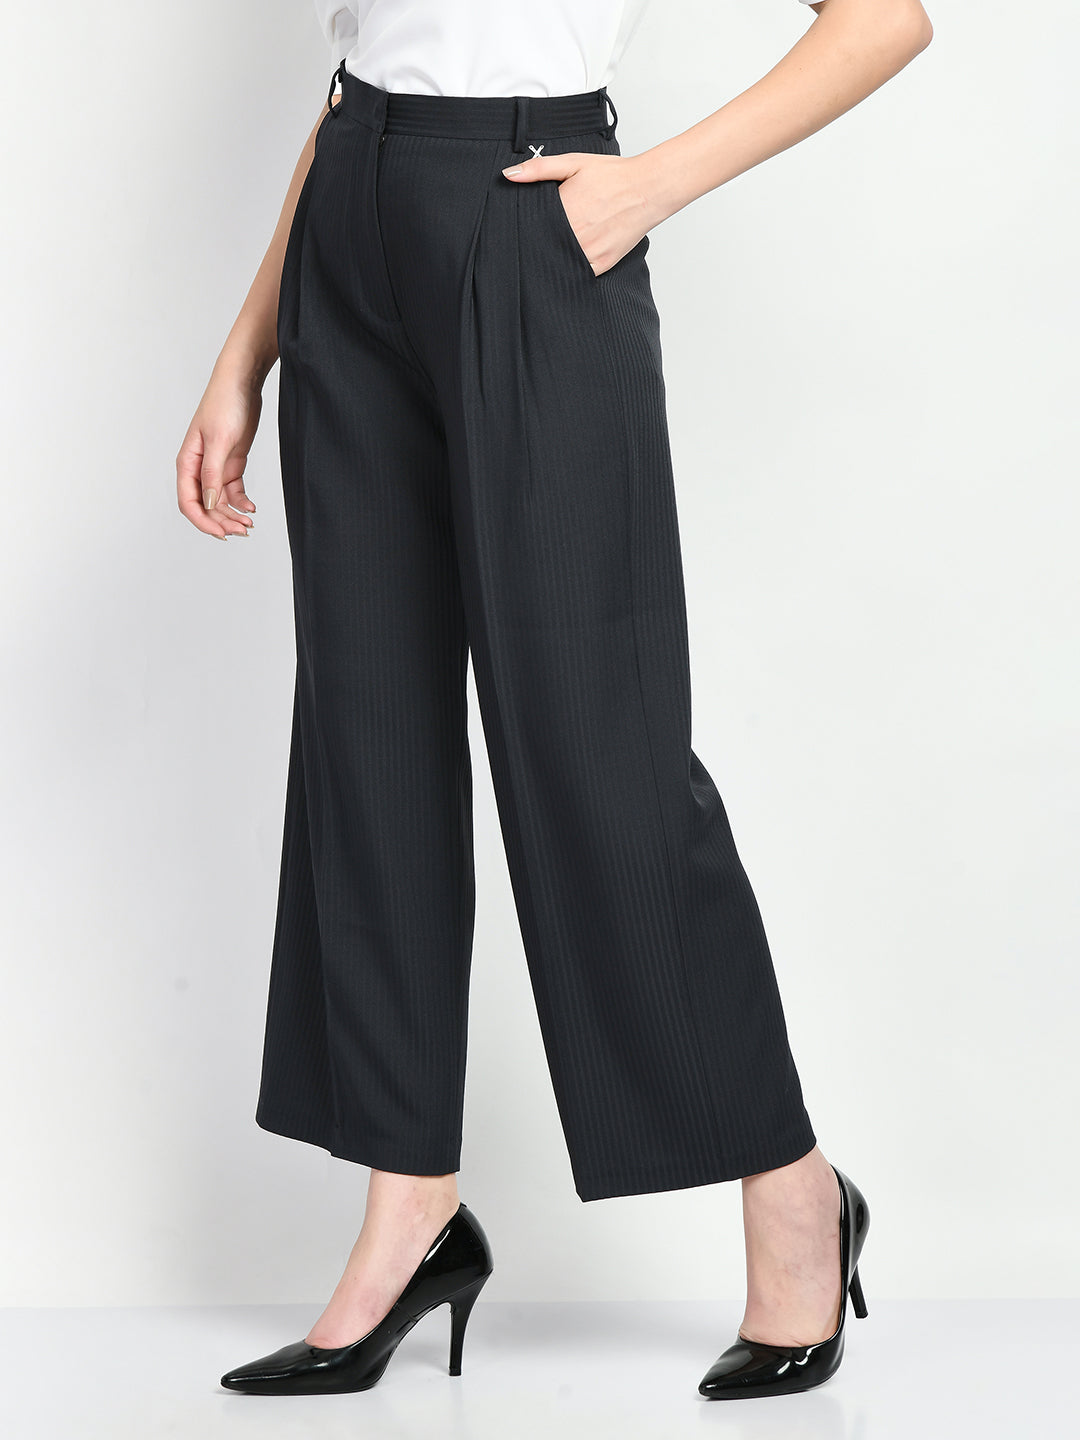 Buy Navy Trousers & Pants for Women by The Silhouette Store Online |  Ajio.com